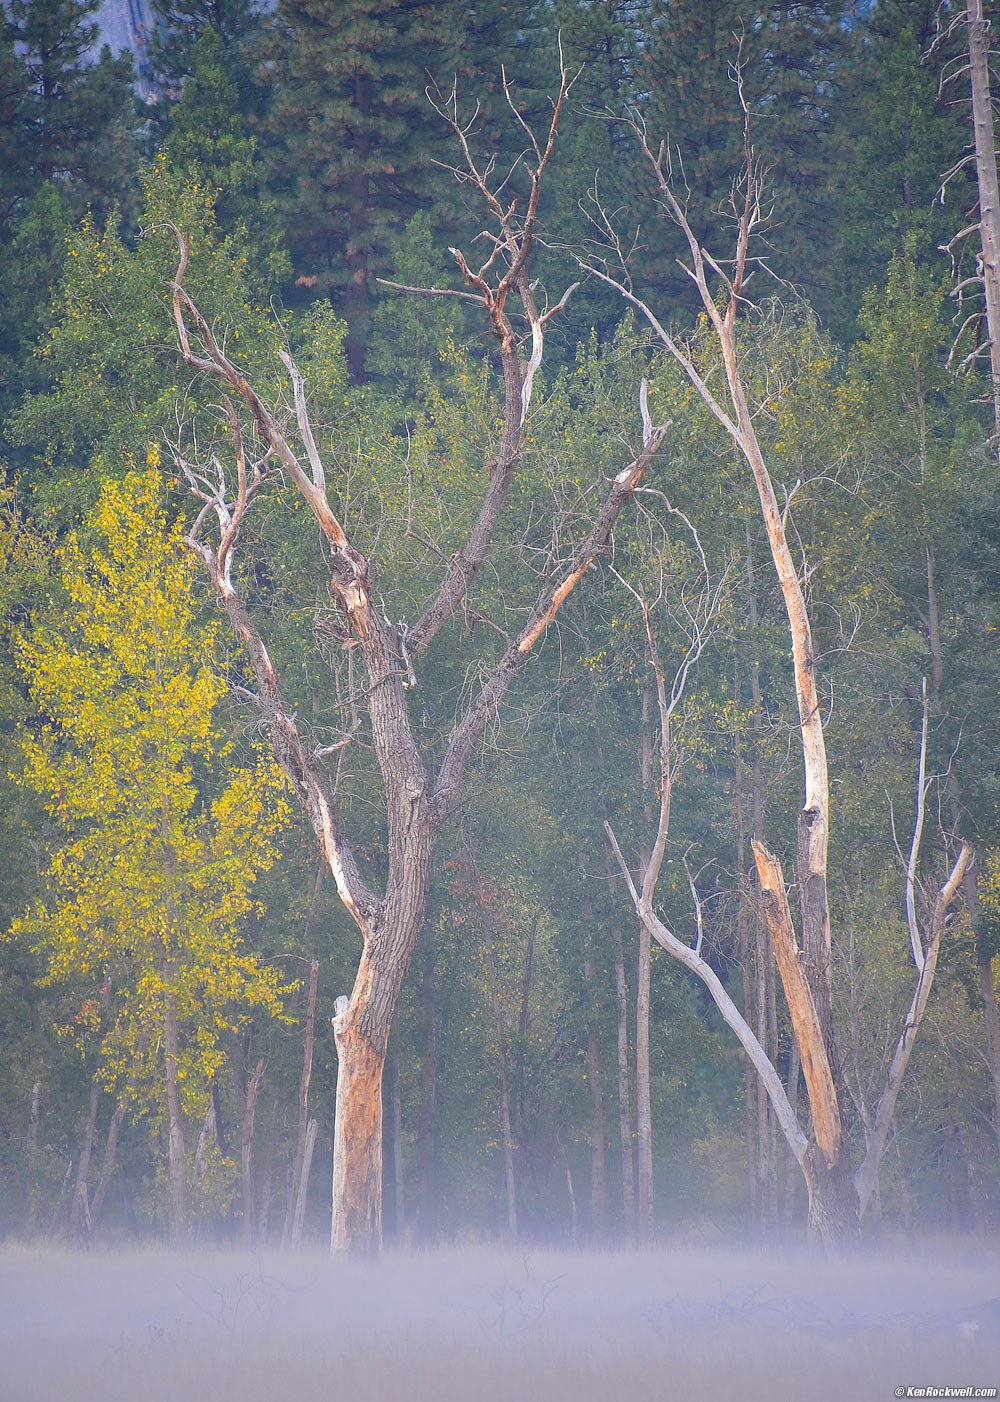 Trees Enrobed by Ground Fog, Merced River, Yosemite Valley